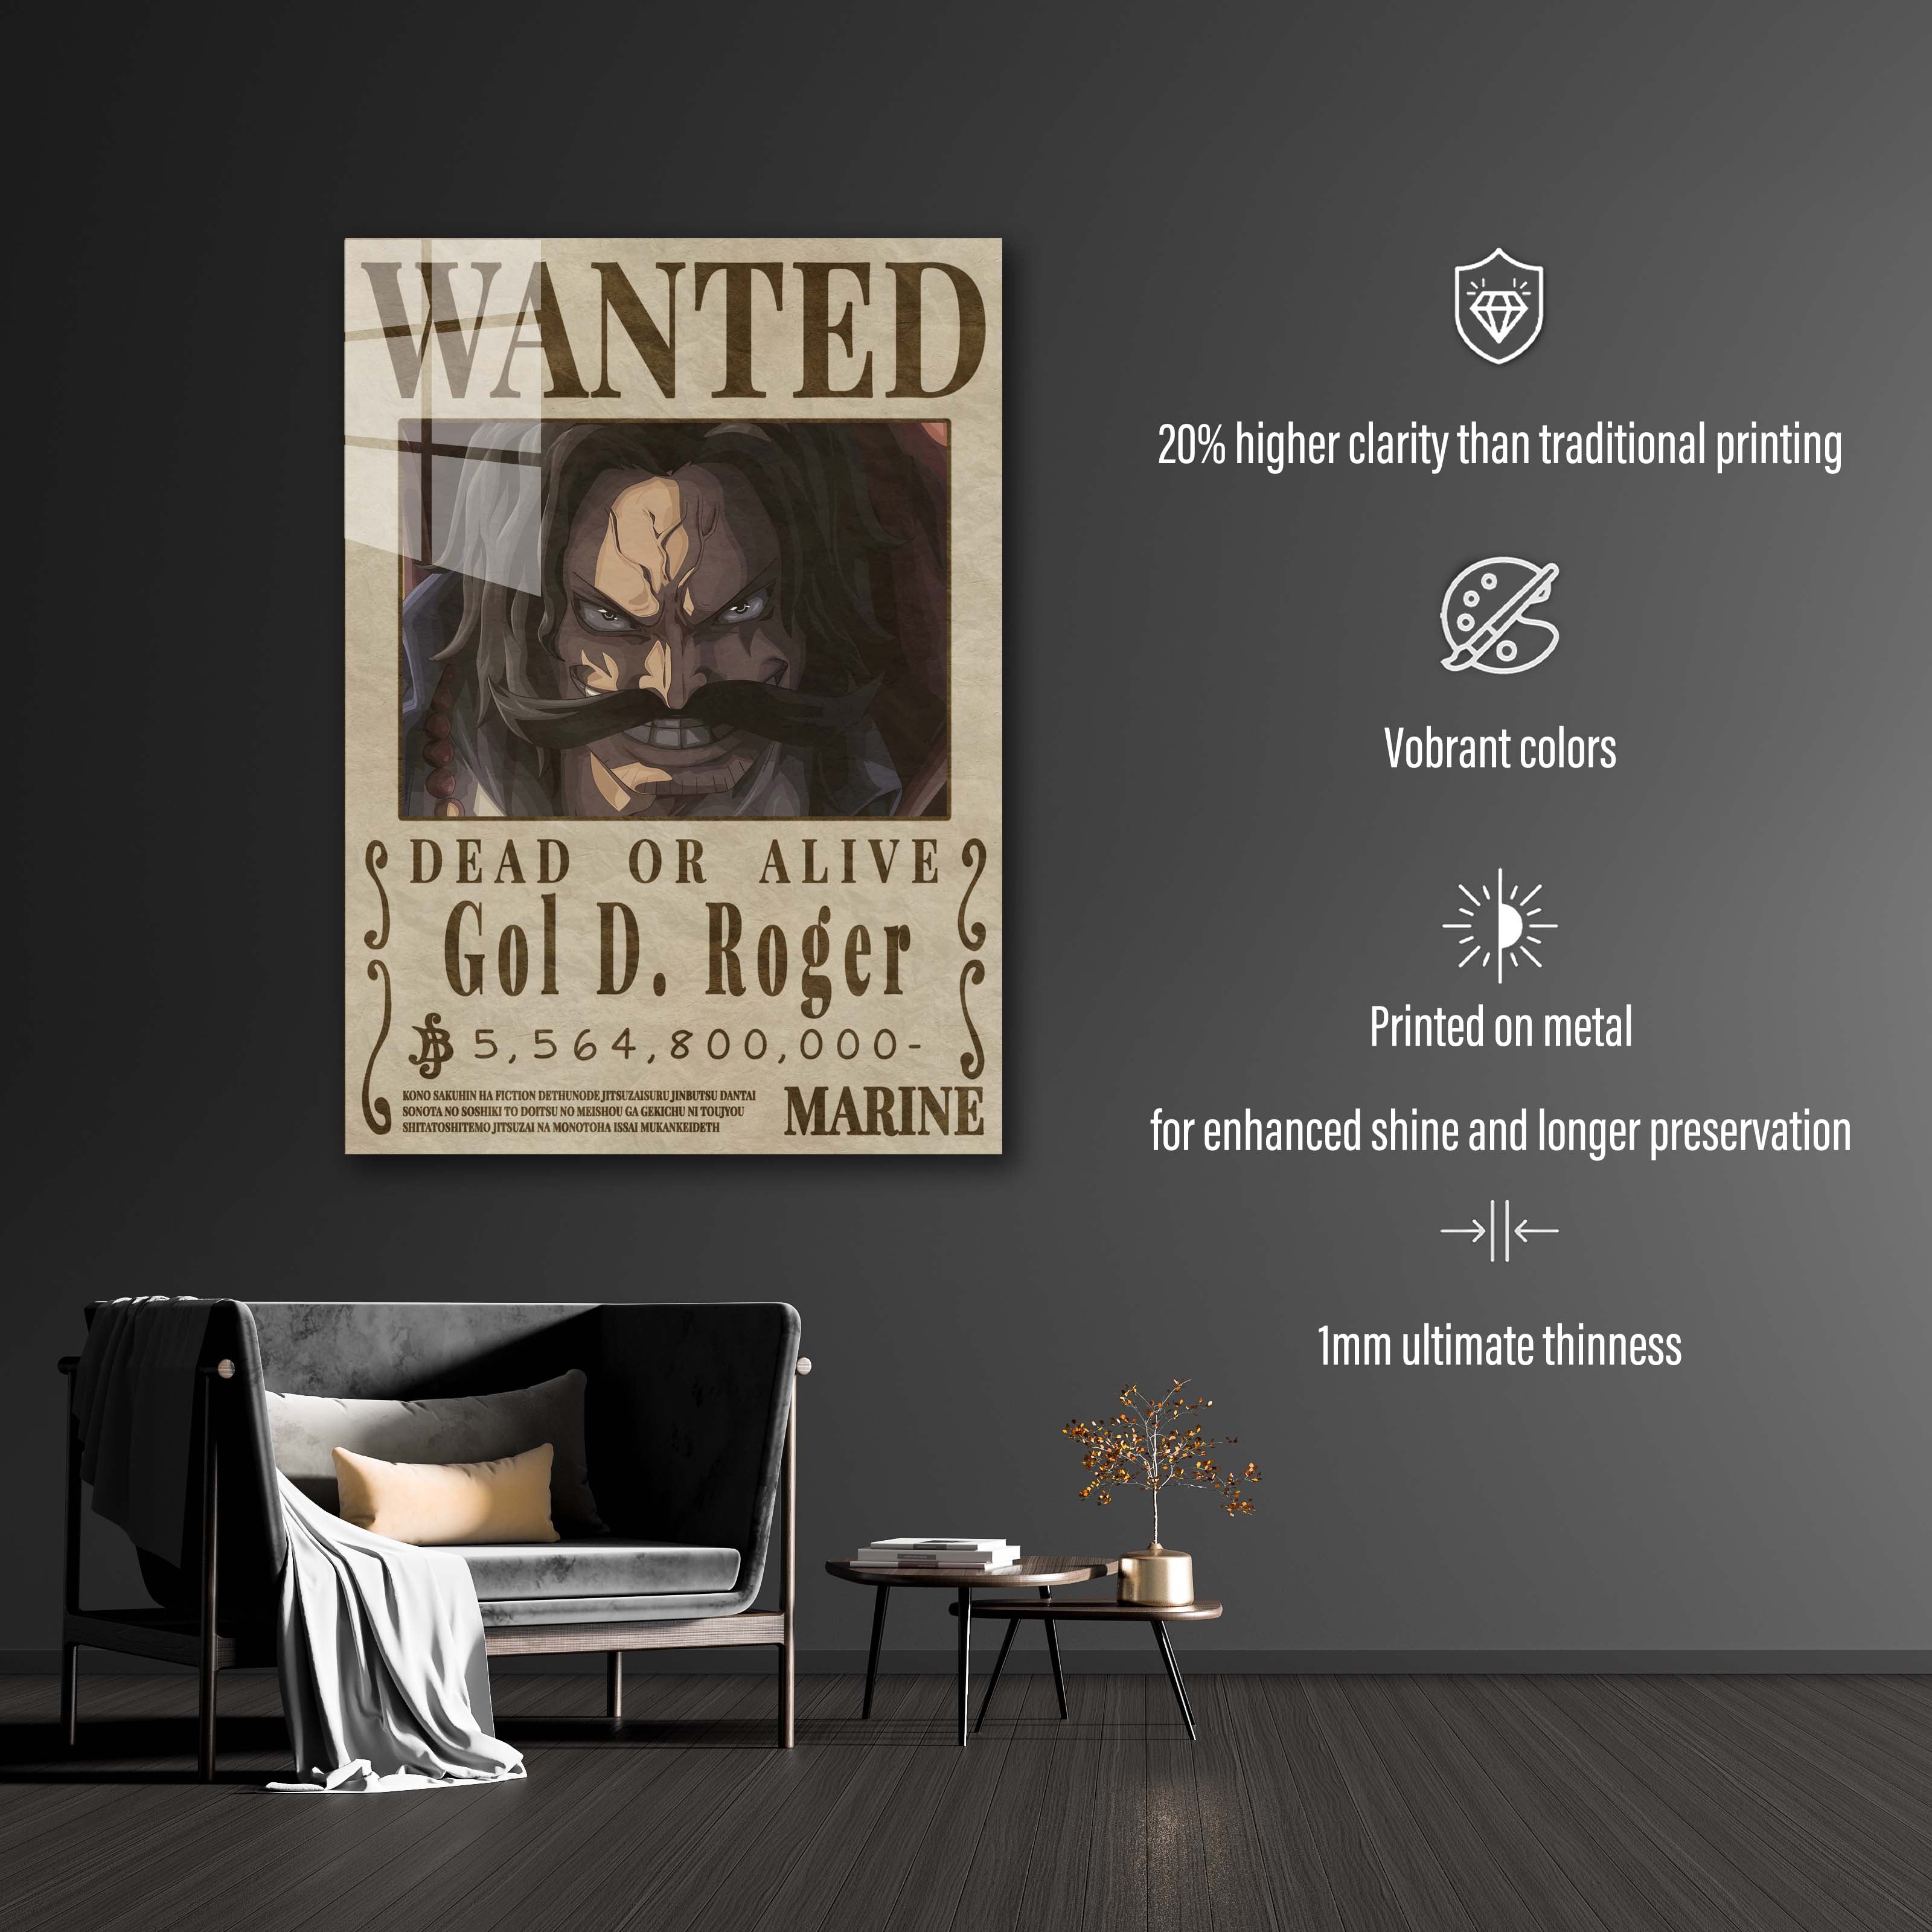 GOLD ROGER One Piece wanted Poster | Zazzle